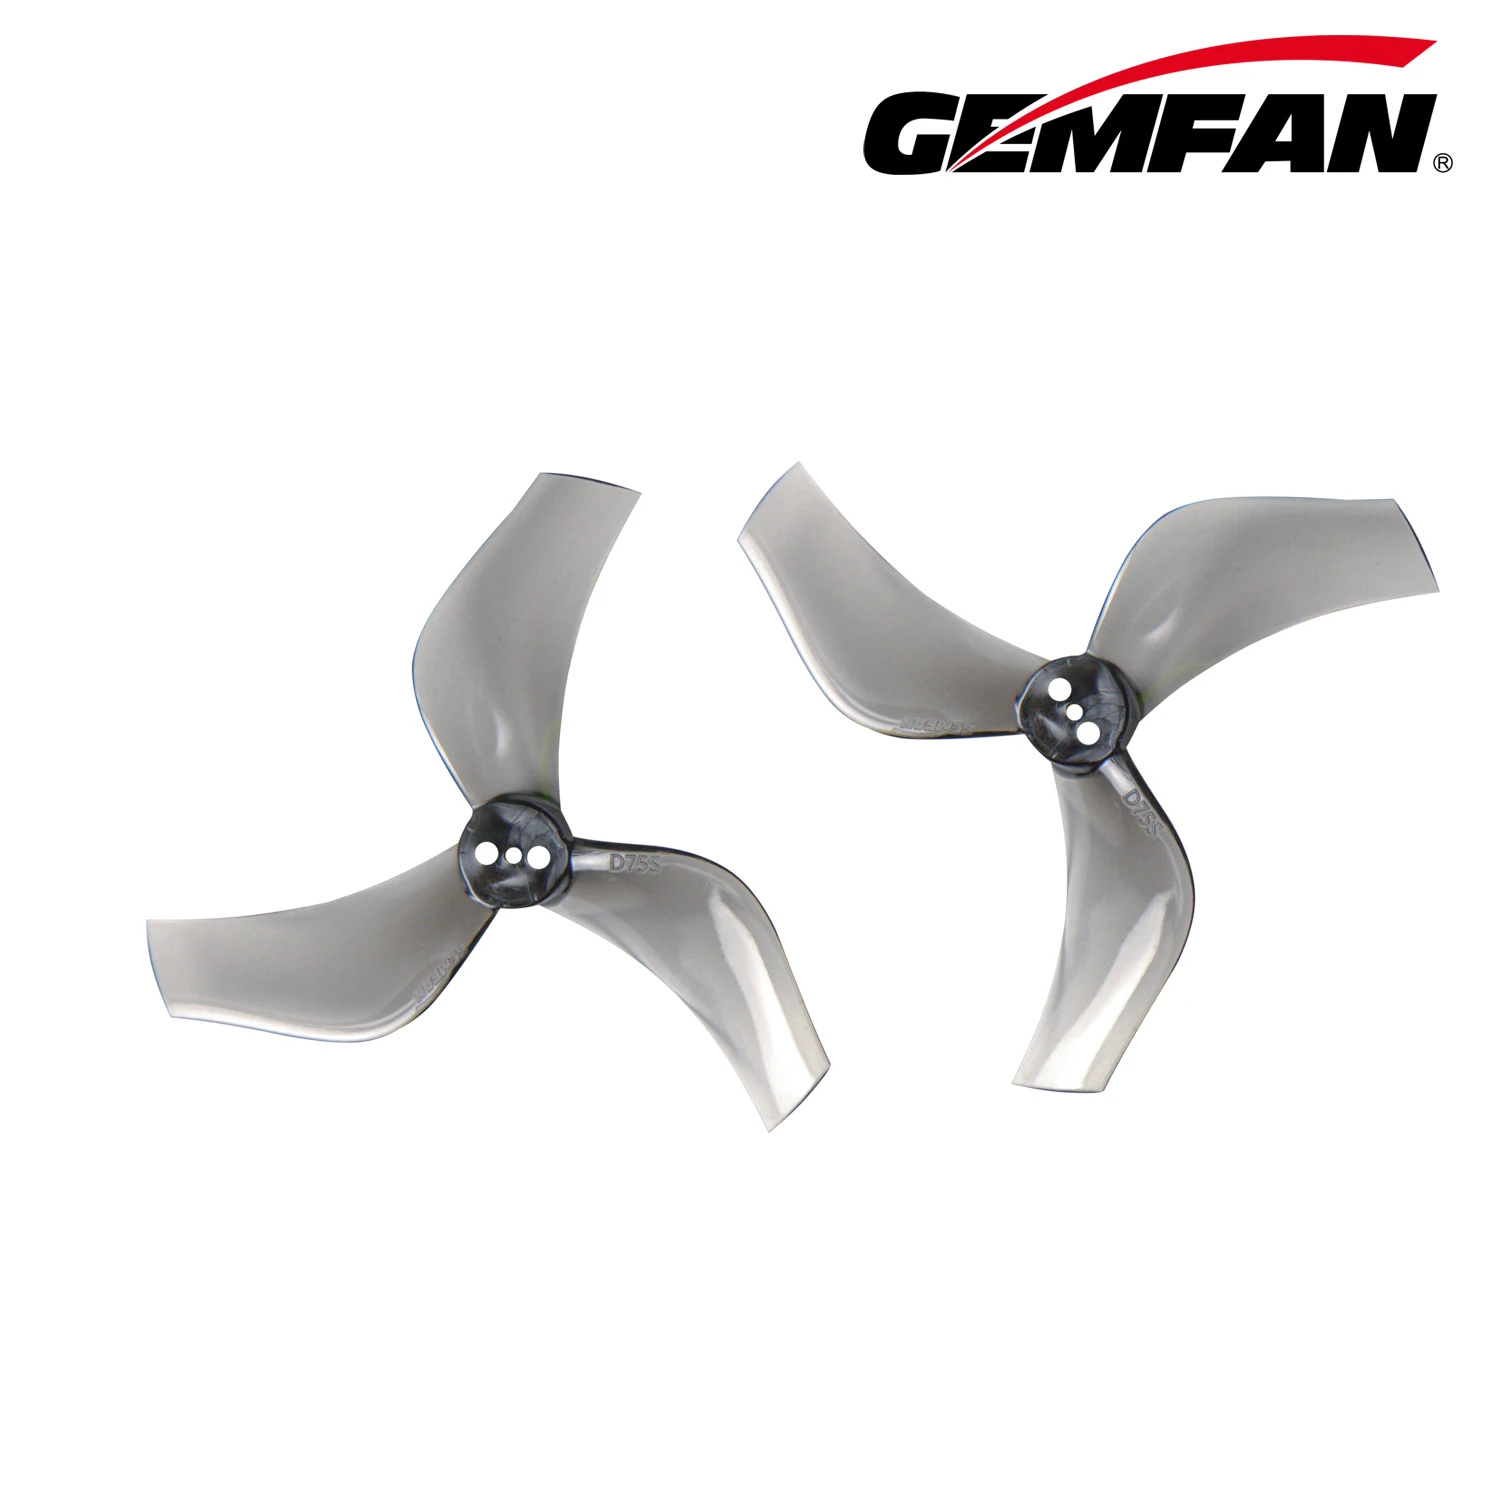 10Pairs(10CW+10CCW) Gemfan D75S Ducted 75mmS 75 mm 3-Rezilo Propeler T-Nastavek 1,5 mm za FPV Freestyle 3inch Cinewhoop Ducted Brnenje